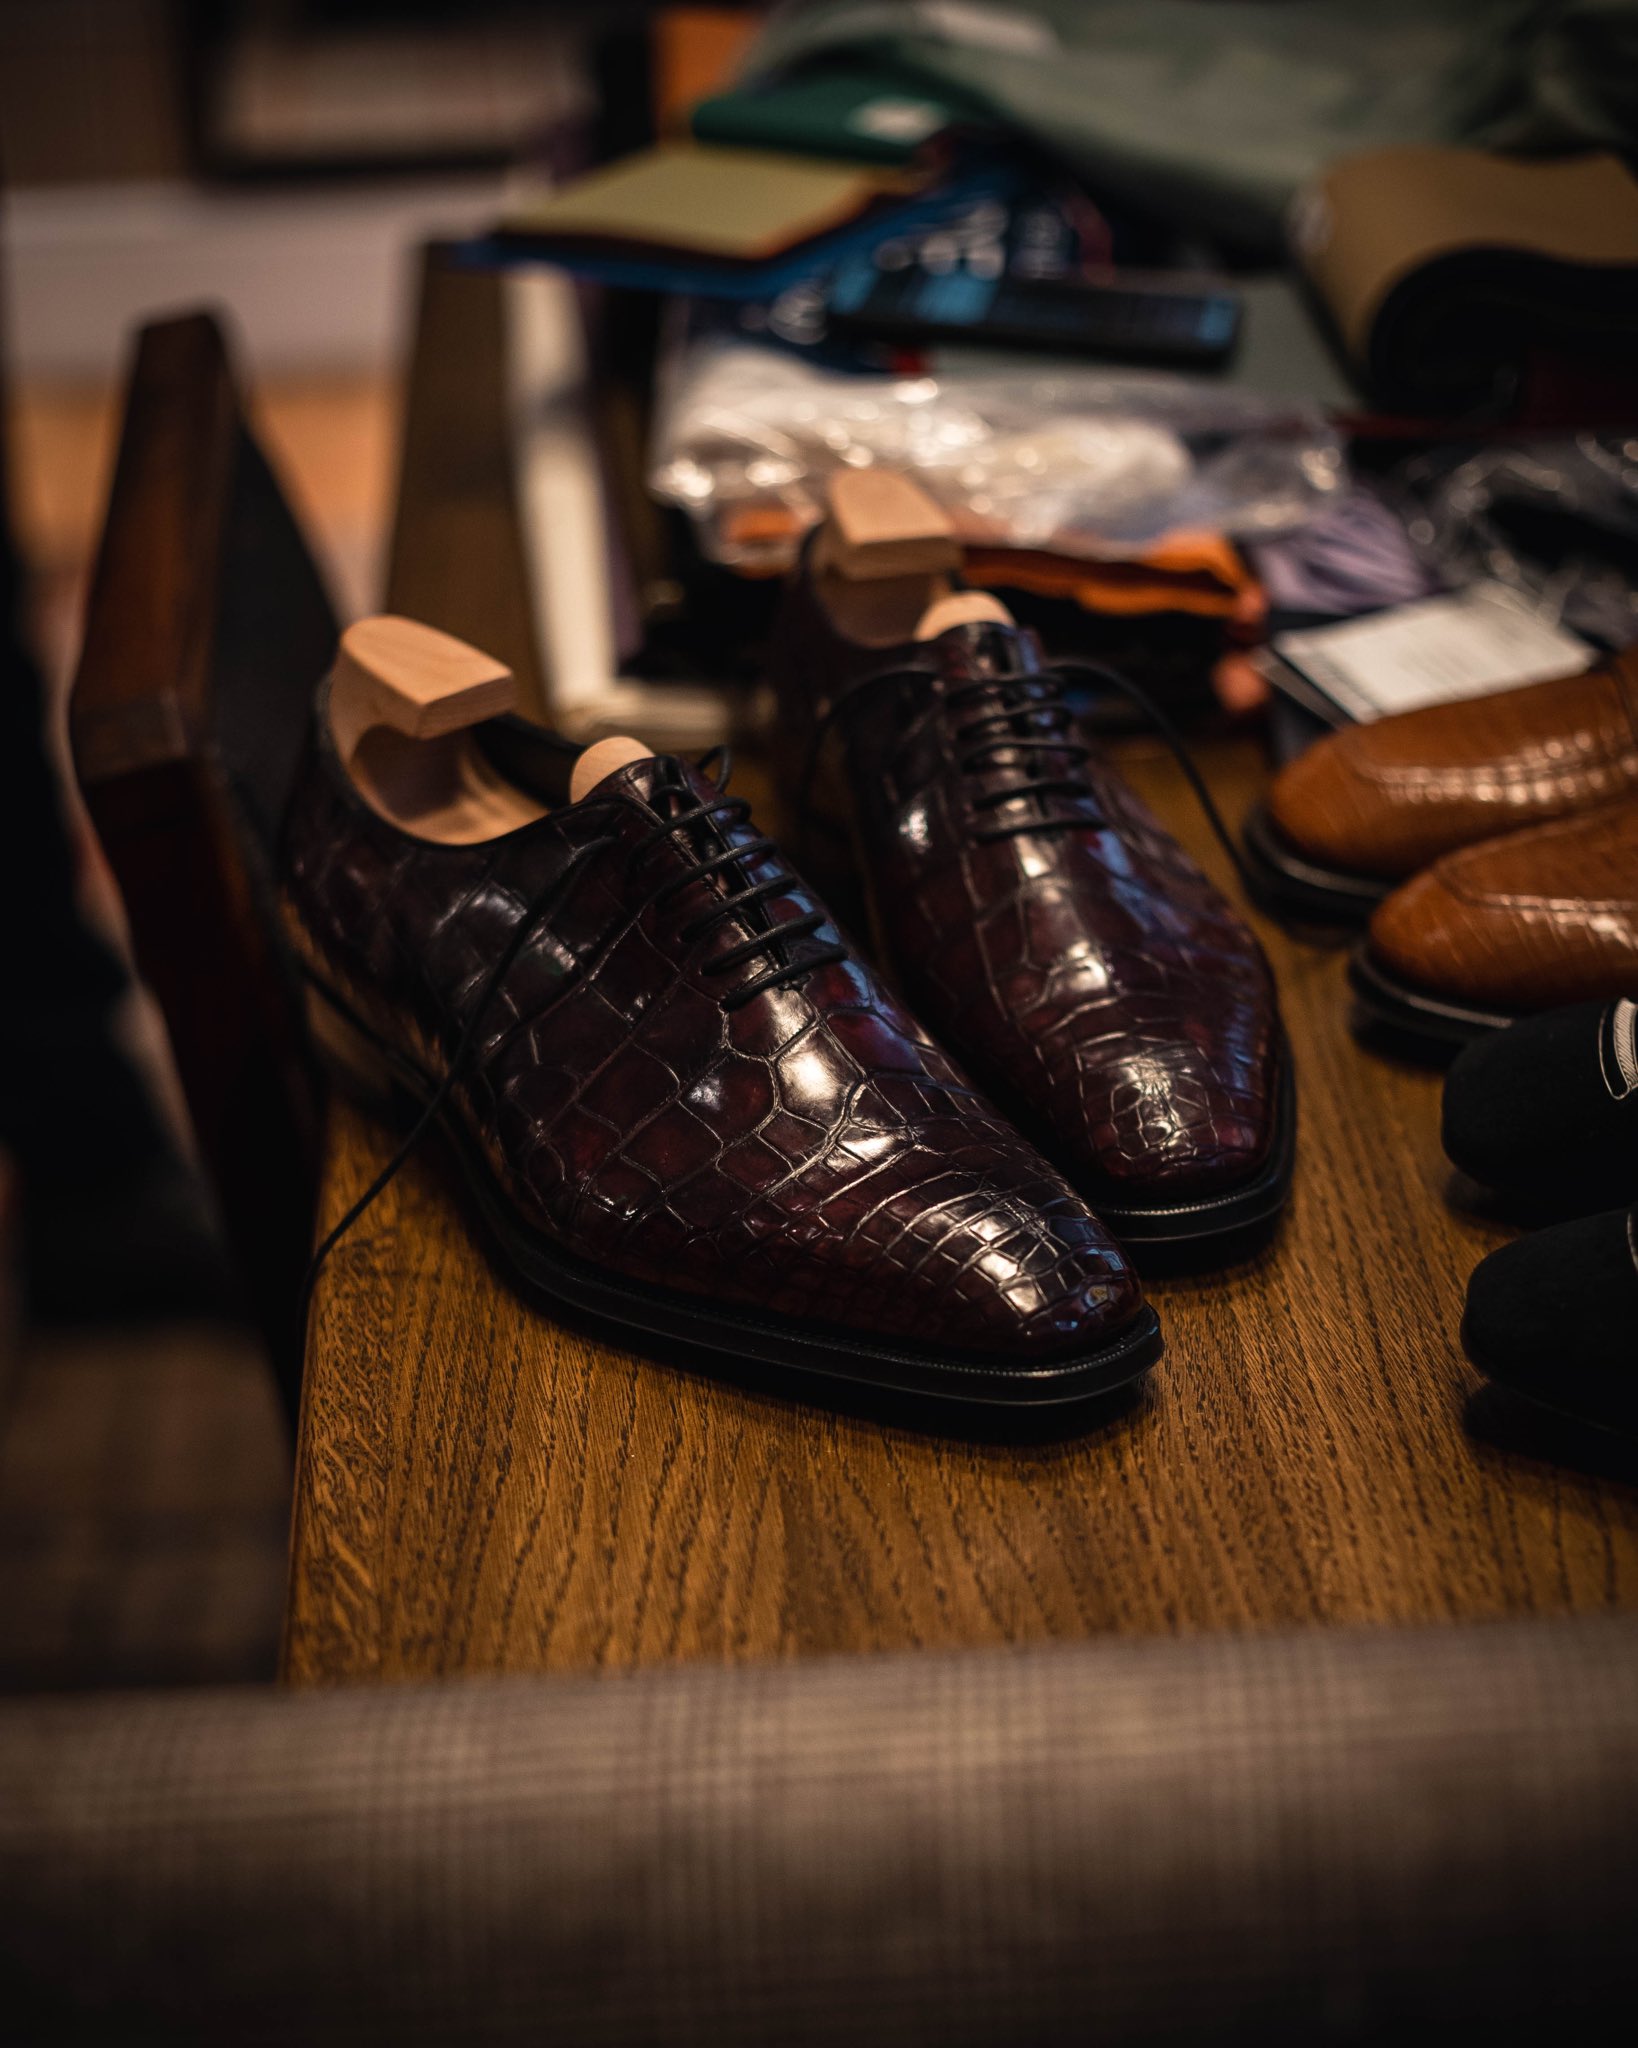 Bespoke shoes for Tristan Tate from Gazziano and Girling